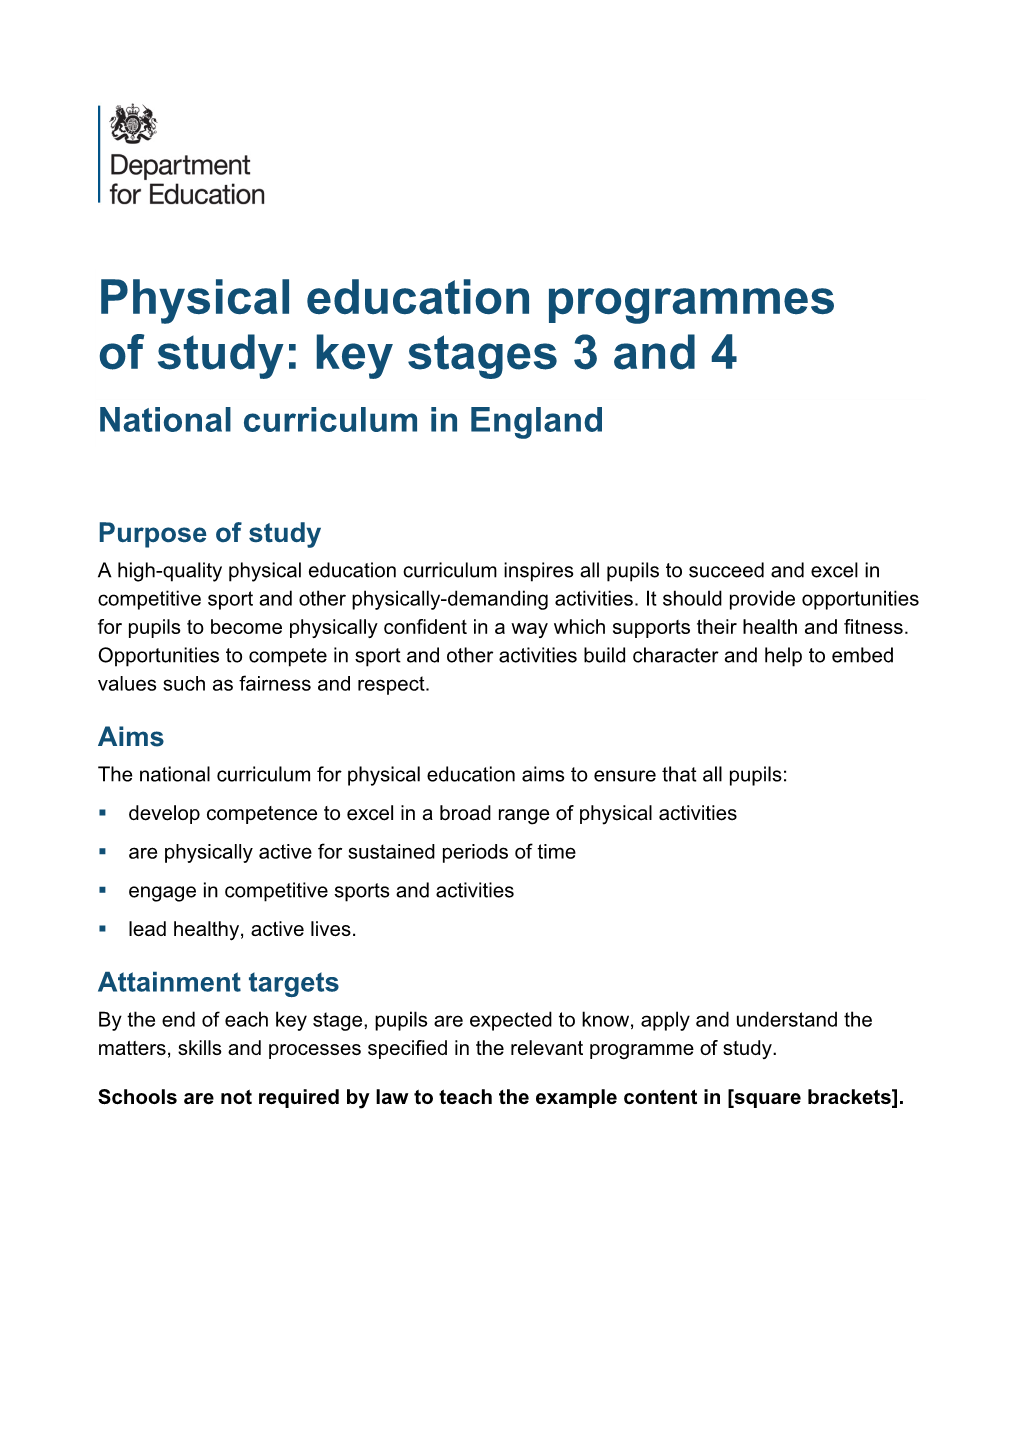 Physical Education Programmes of Study: Key Stage 3 & 4